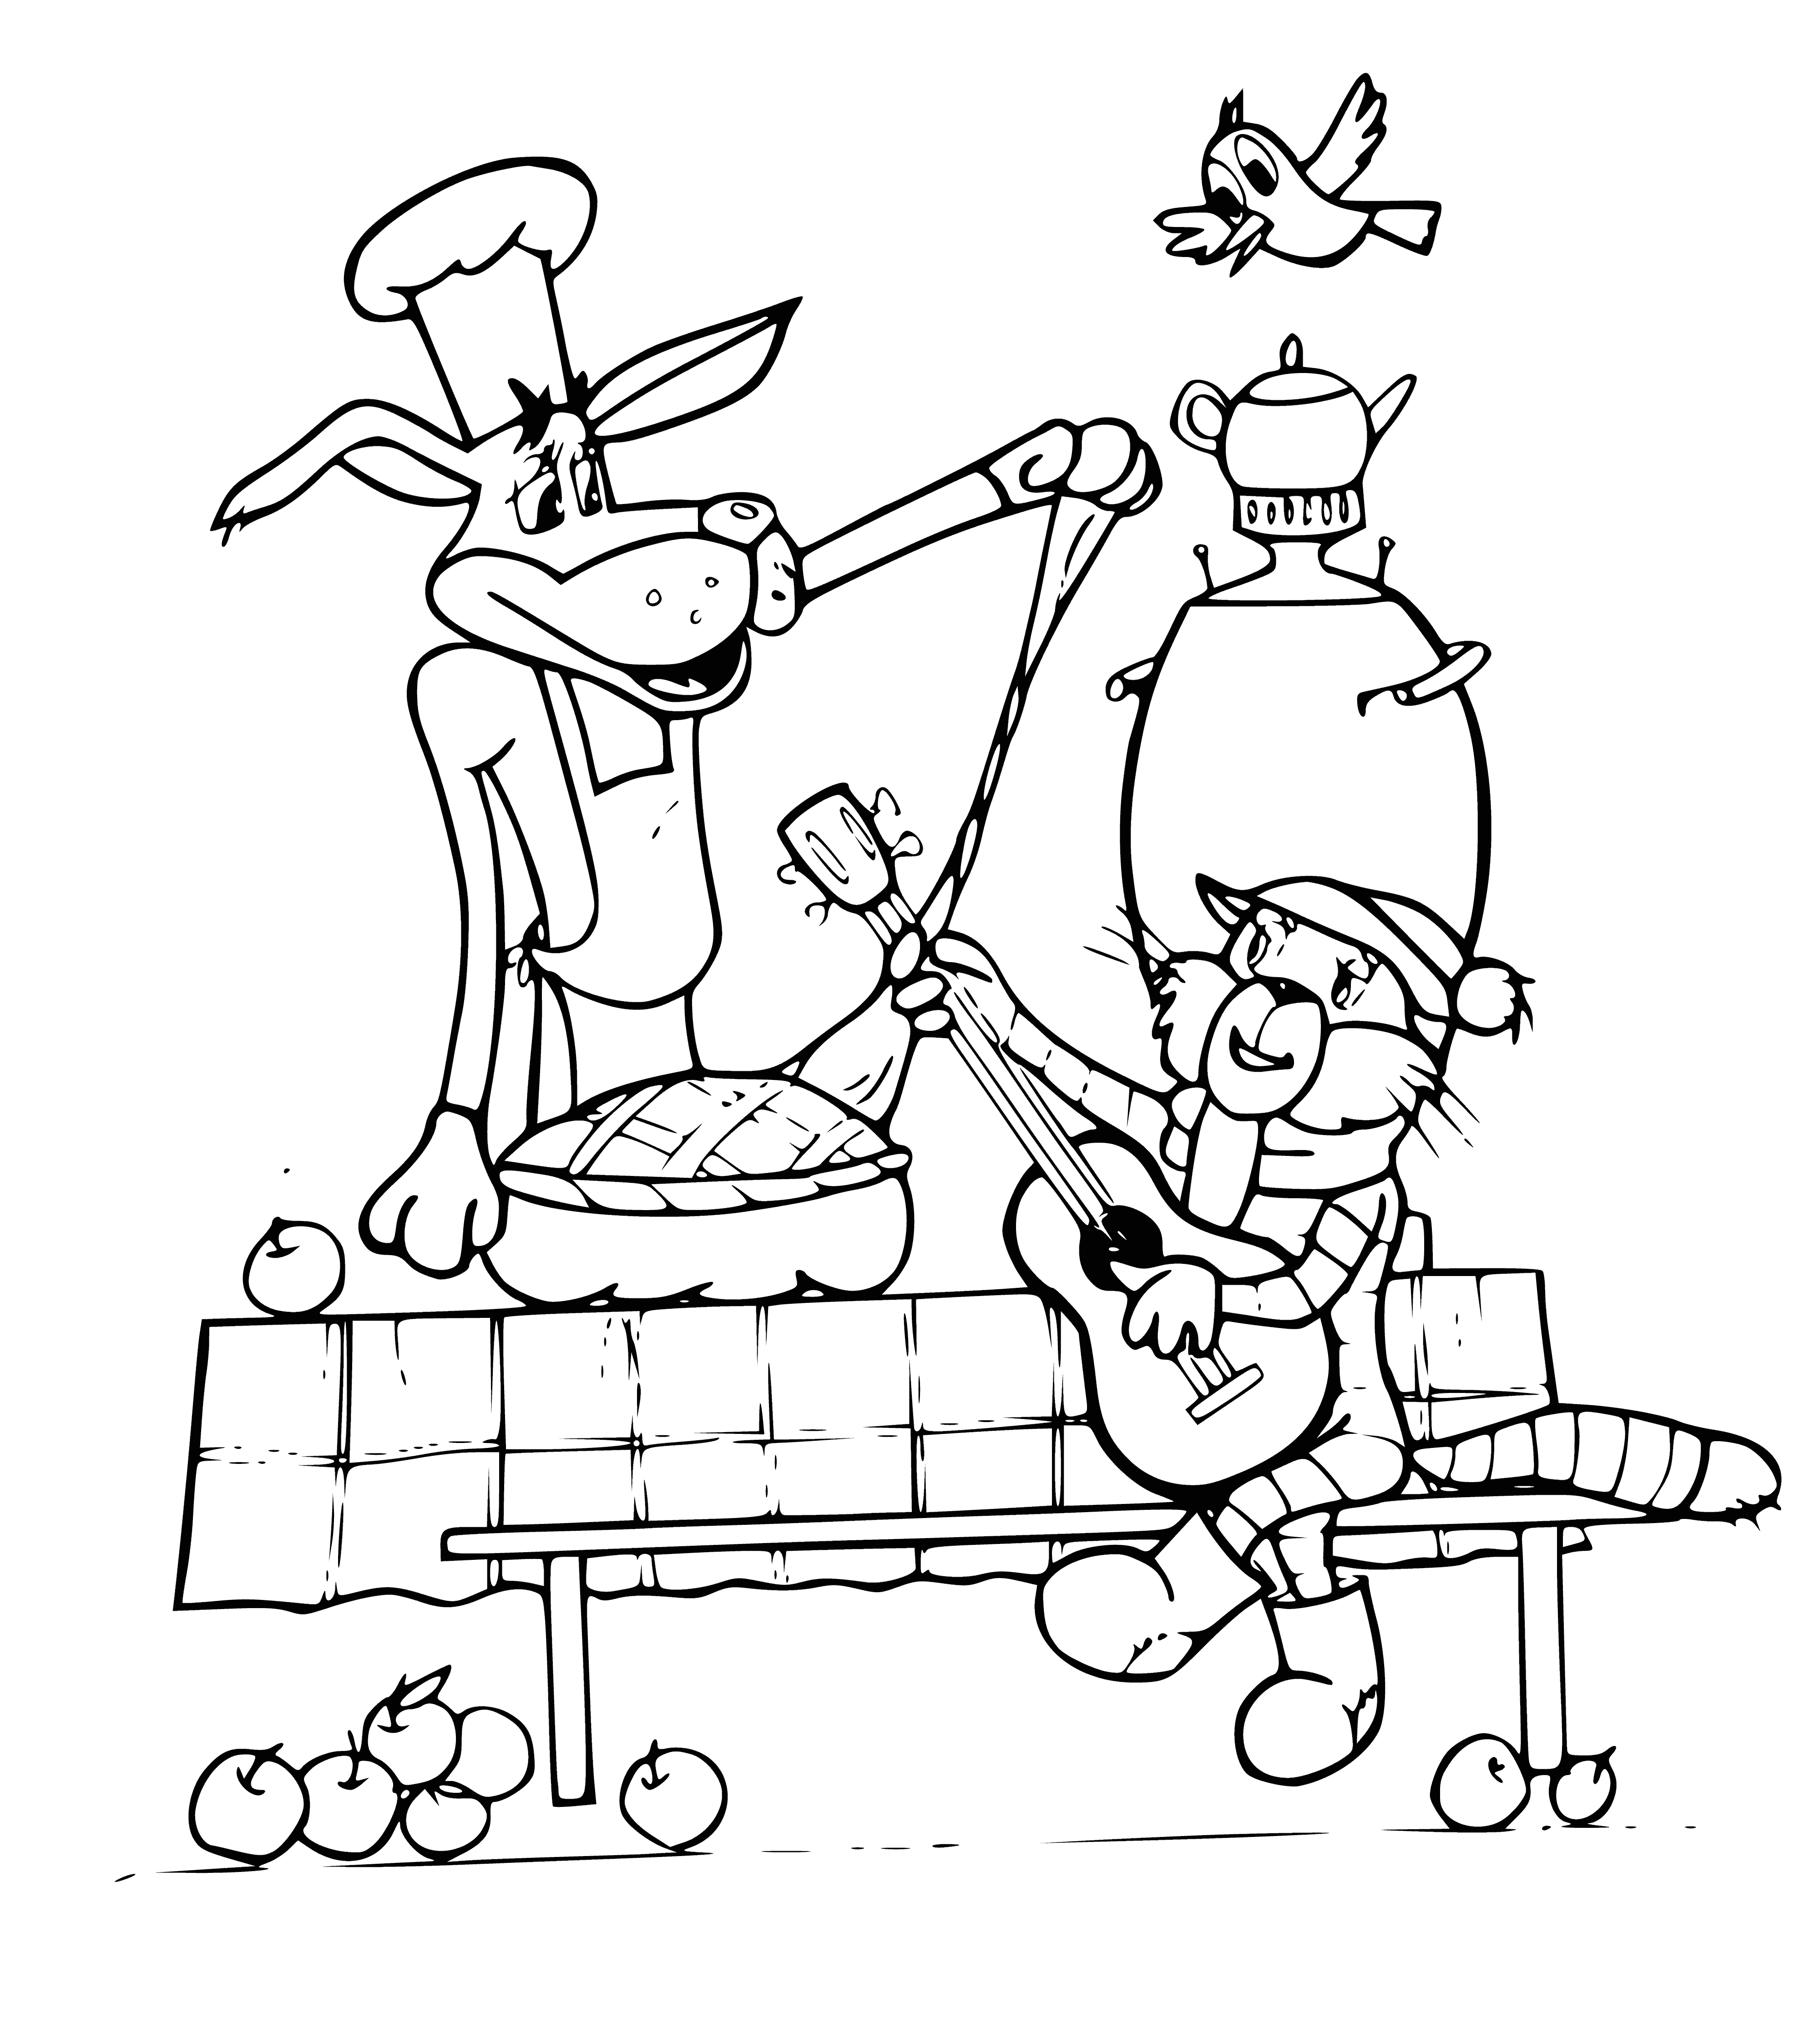 coloring page: At Prostokvashino live Sharik (dog) & Matroskin (cat). Sharik stands on hind legs & paws on Matroskin who looks unimpressed & has tongue out.